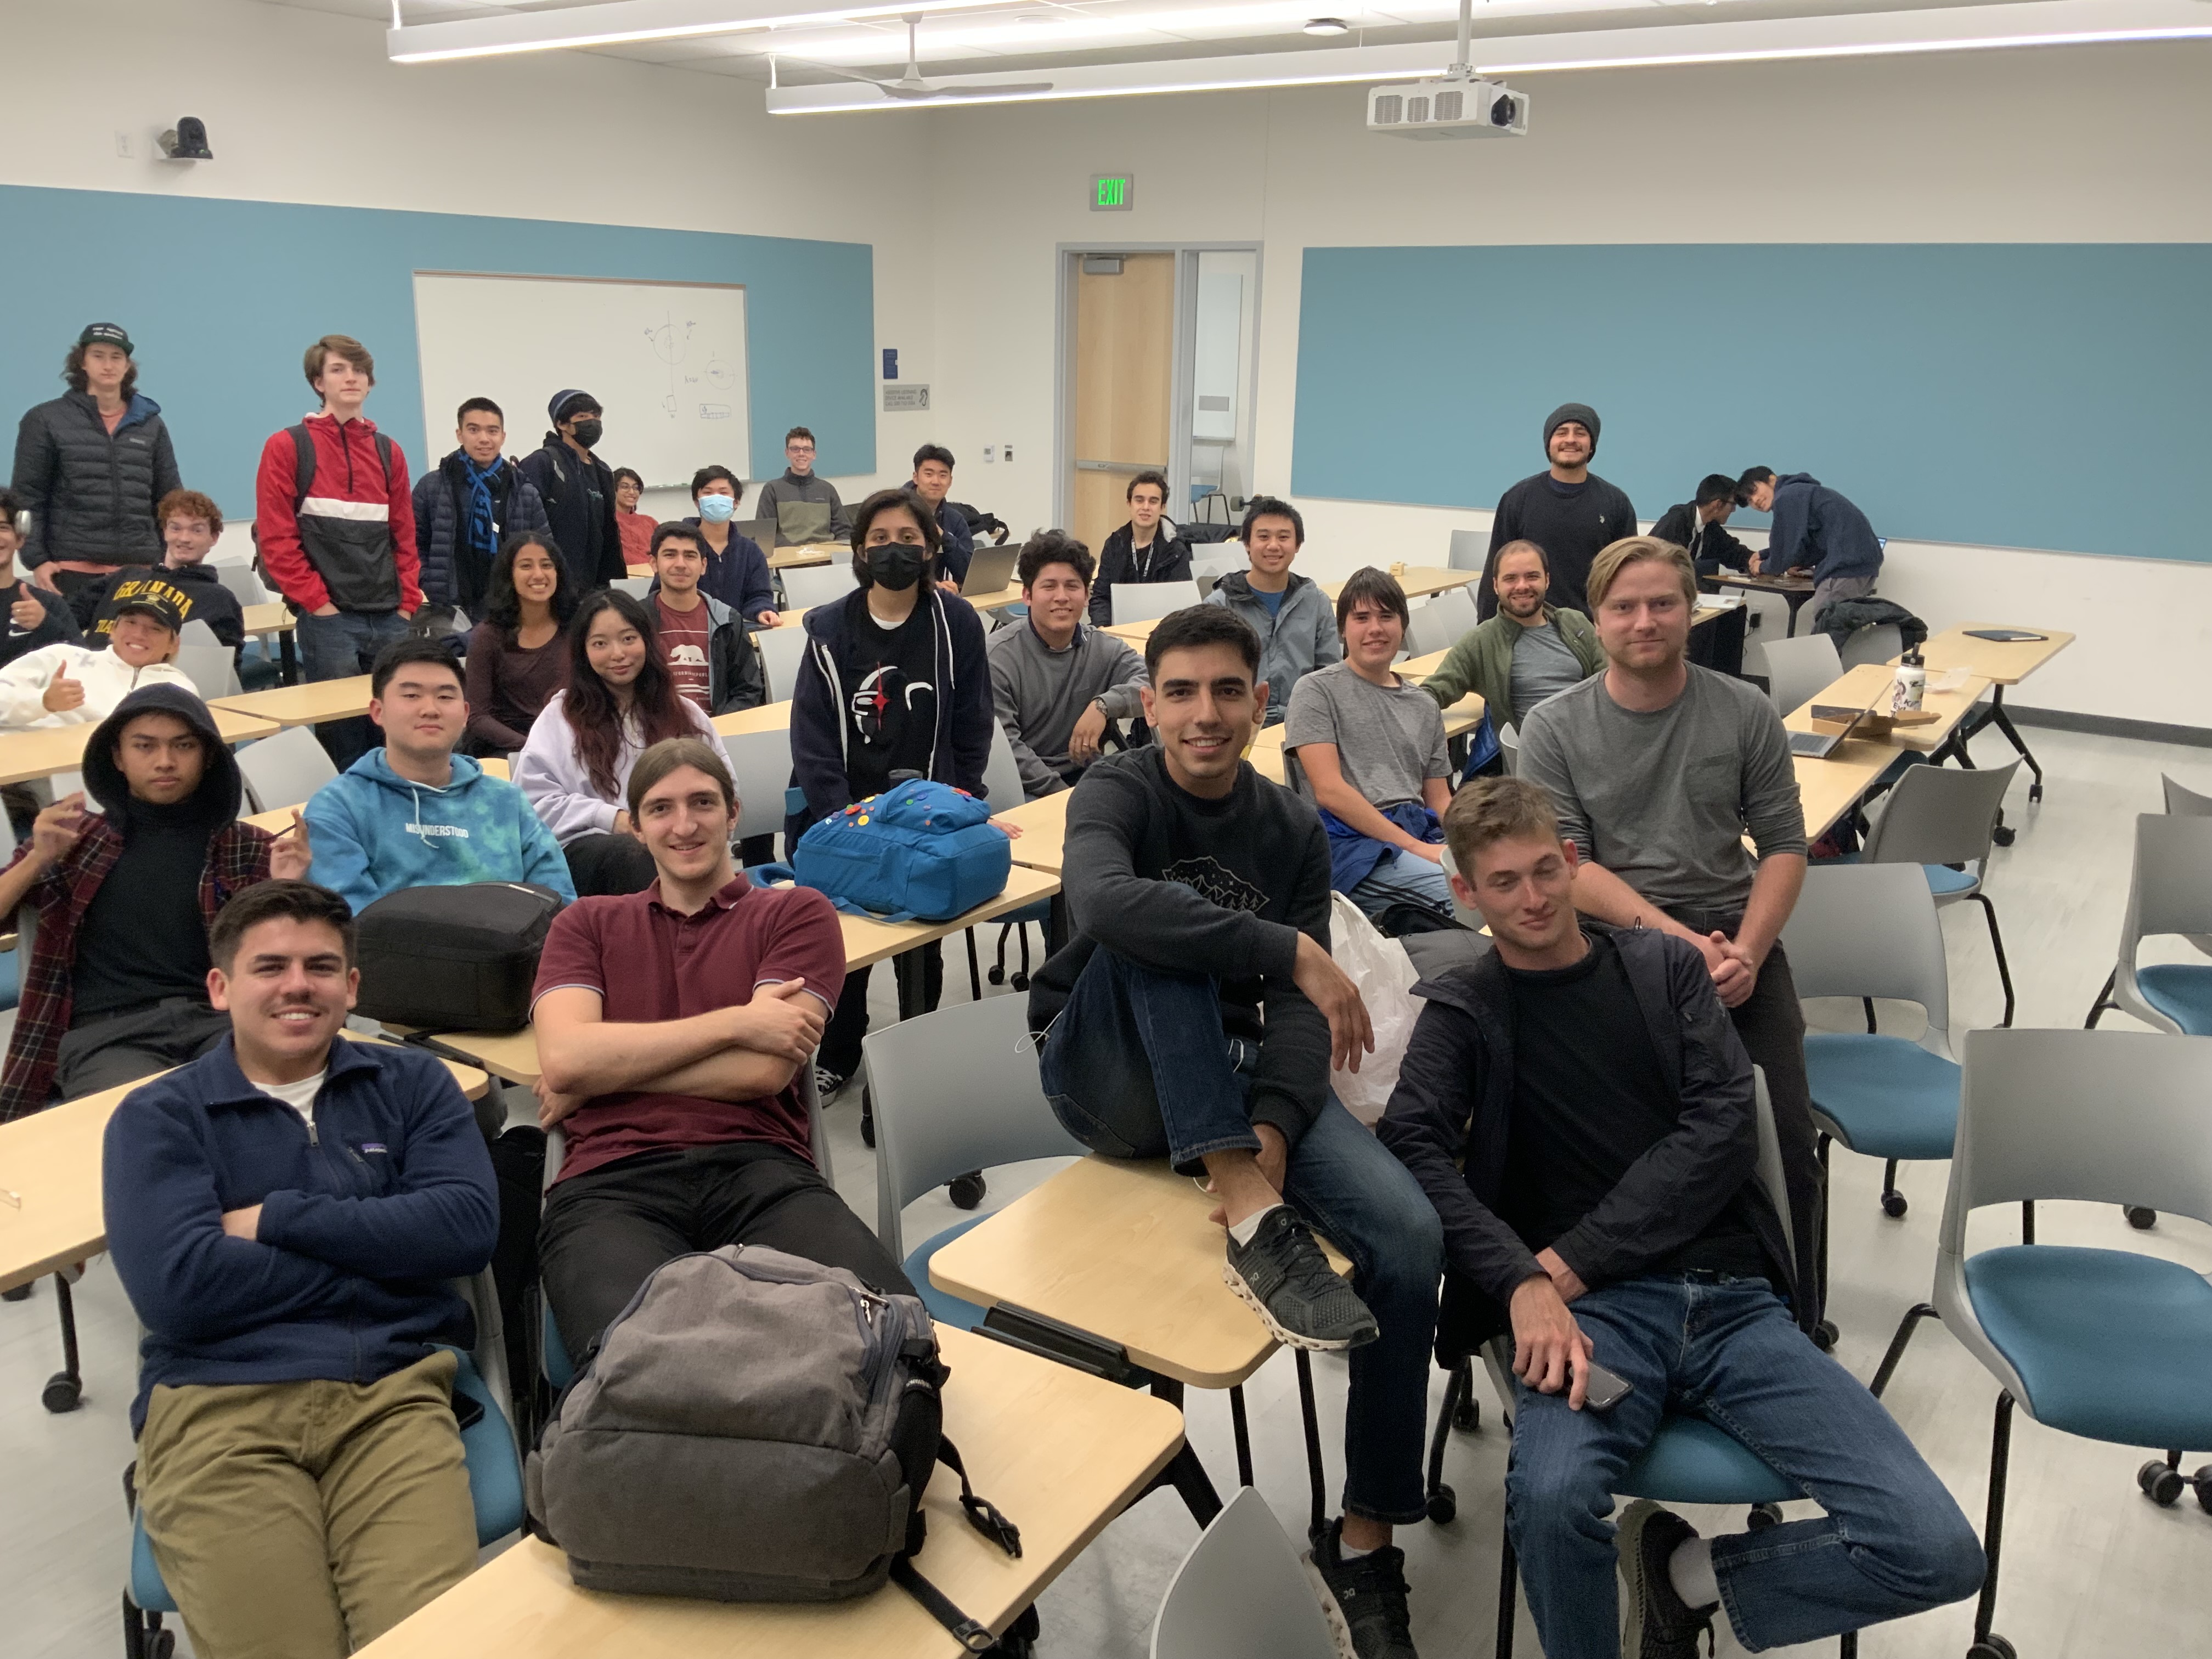 Many Aggie Propulsion Laboratory students sit in a classroom for group photo